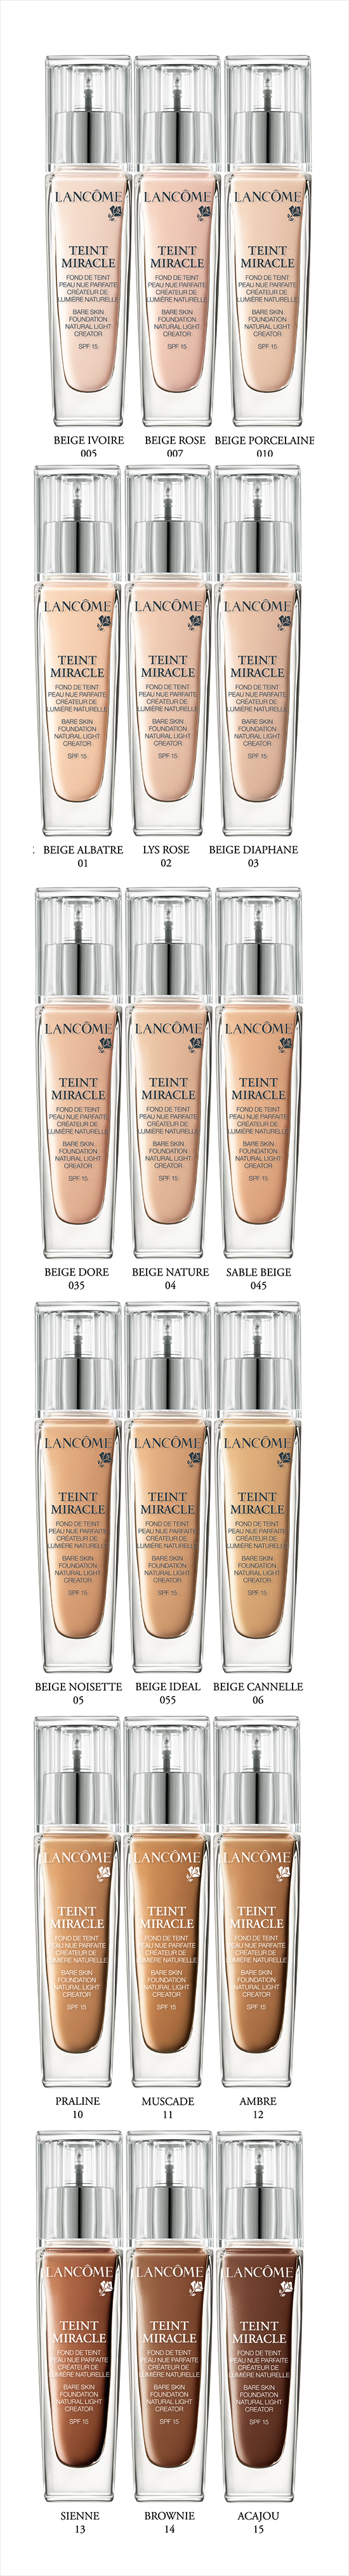 Lancome-Teint-Miracle-Bare-Foundation